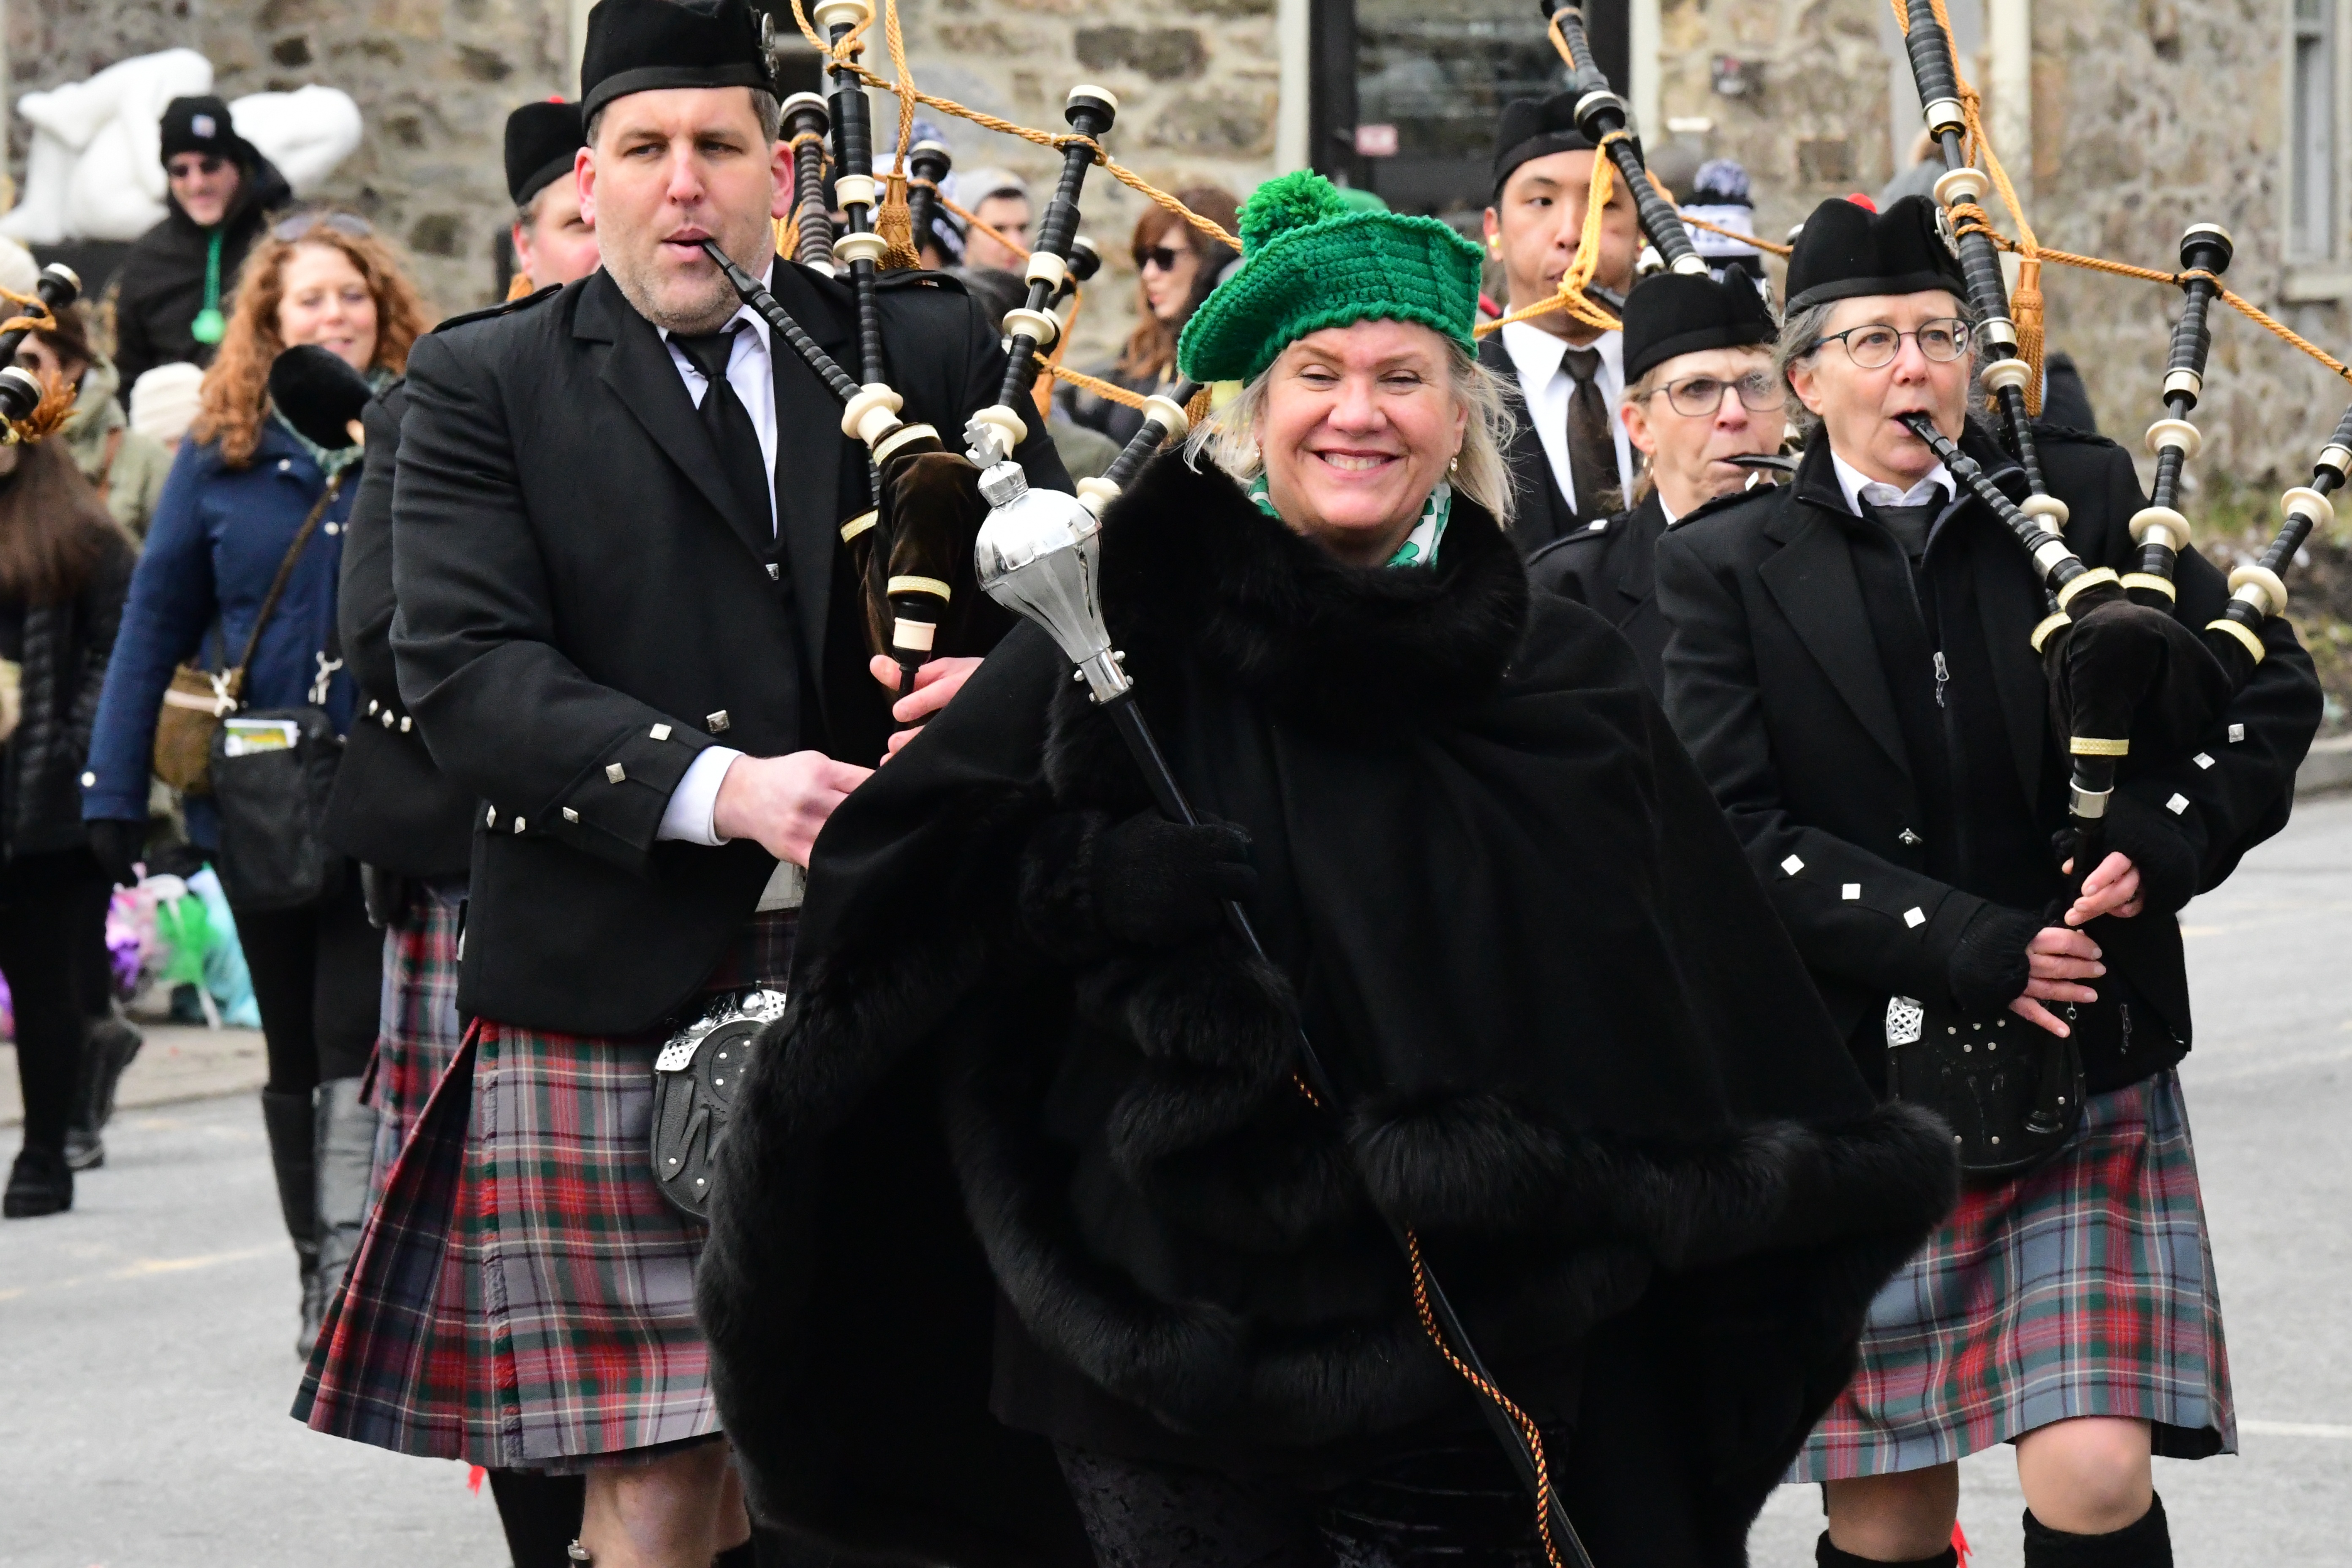 The 2022 St Patrick's Day Parade hosted by the Friendly Sons of St Patrick Hunterdon County took place in Clinton on March 13 , 2022

St. Ann's of Hampton Pipes & Drums